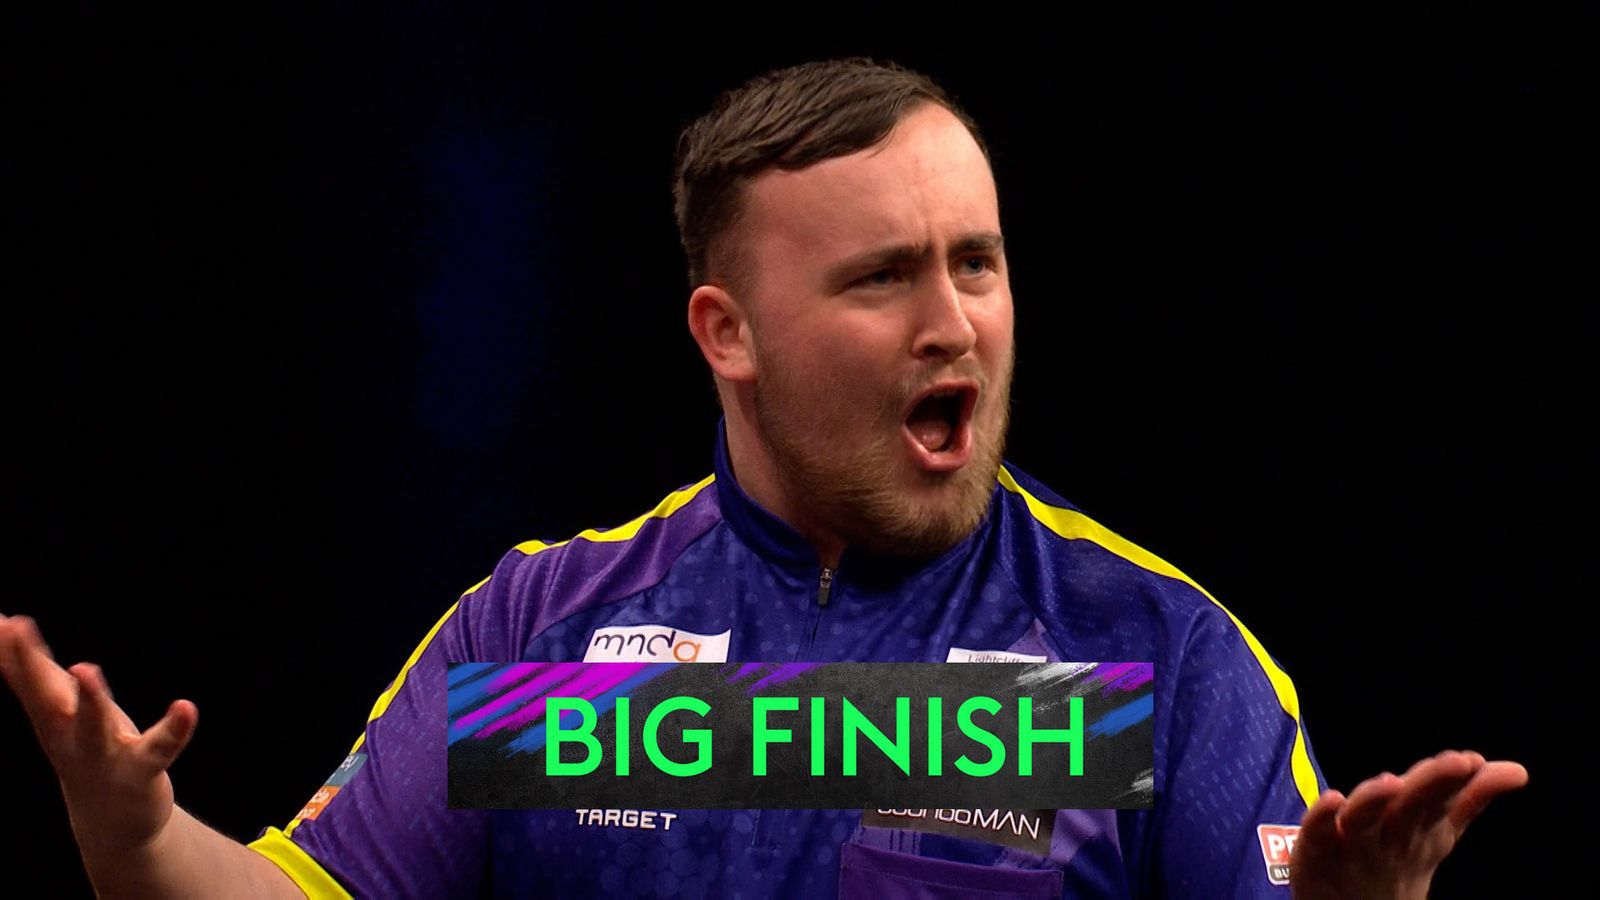 Littler stuns Leeds crowd with 146 finish | 'That's what special players do!'